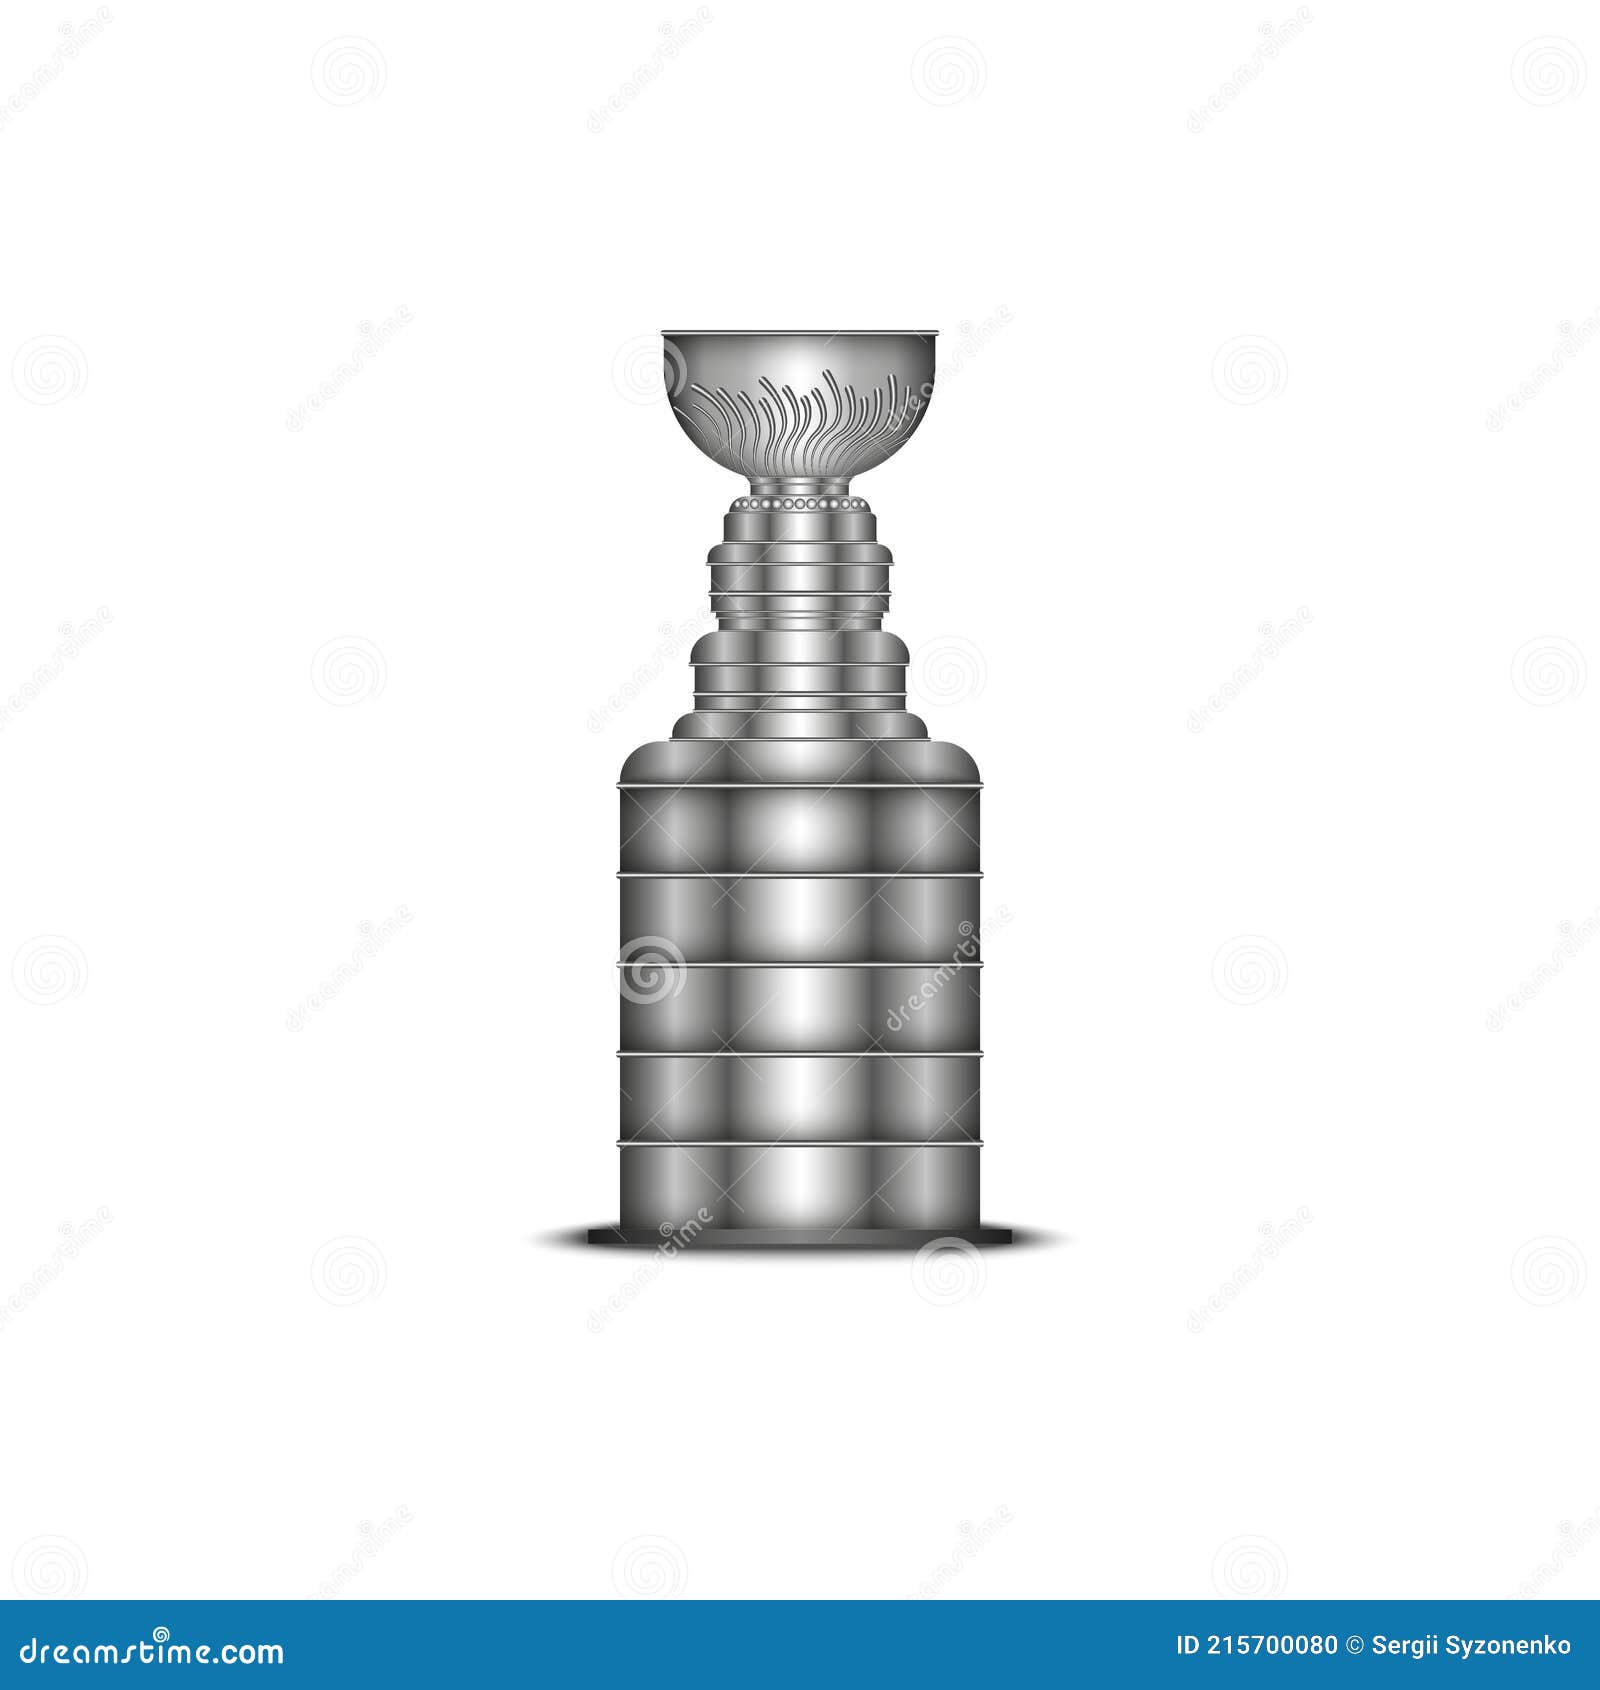 https://thumbs.dreamstime.com/z/stanley-cup-isolated-white-background-realistic-d-vector-model-object-nhl-hockey-trophy-215700080.jpg